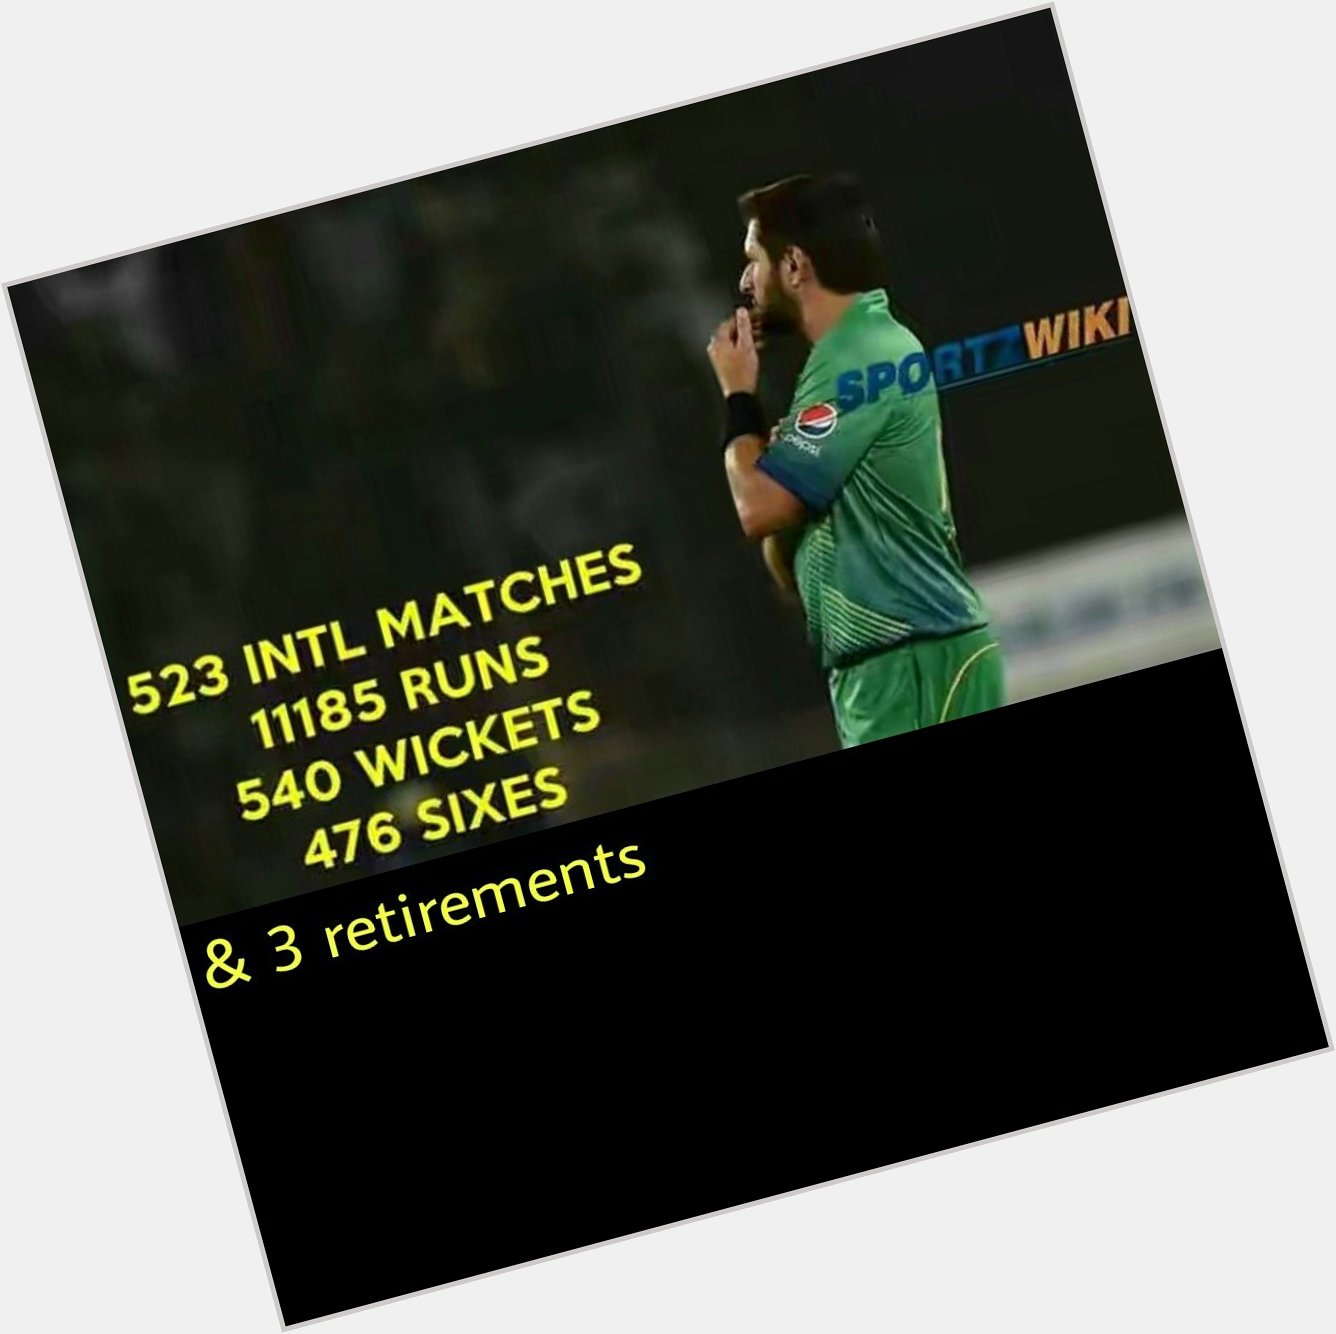 Happy birthday Shahid afridi guy with incredible stats..   